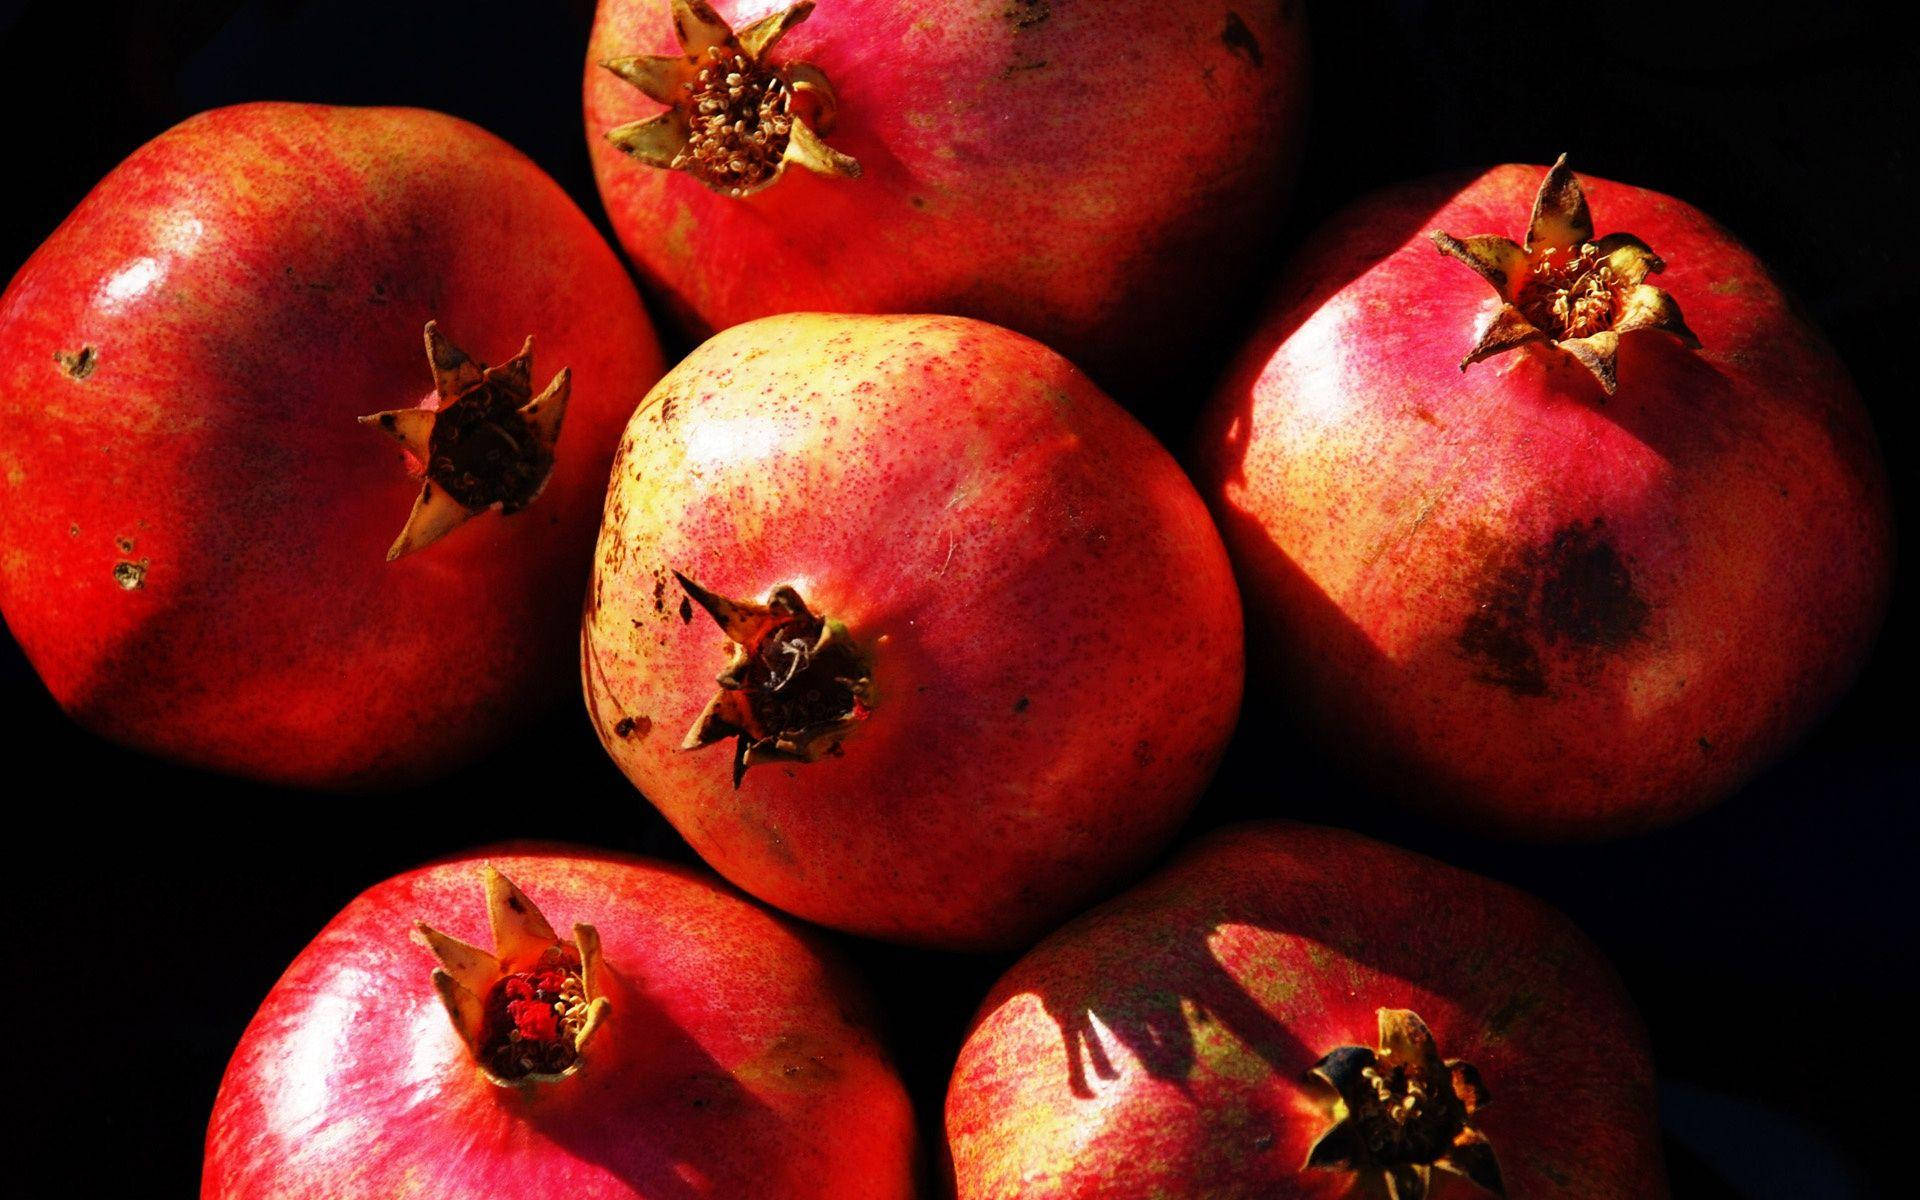 Aesthetic Up Close Photography of Six Pomegranates Wallpaper